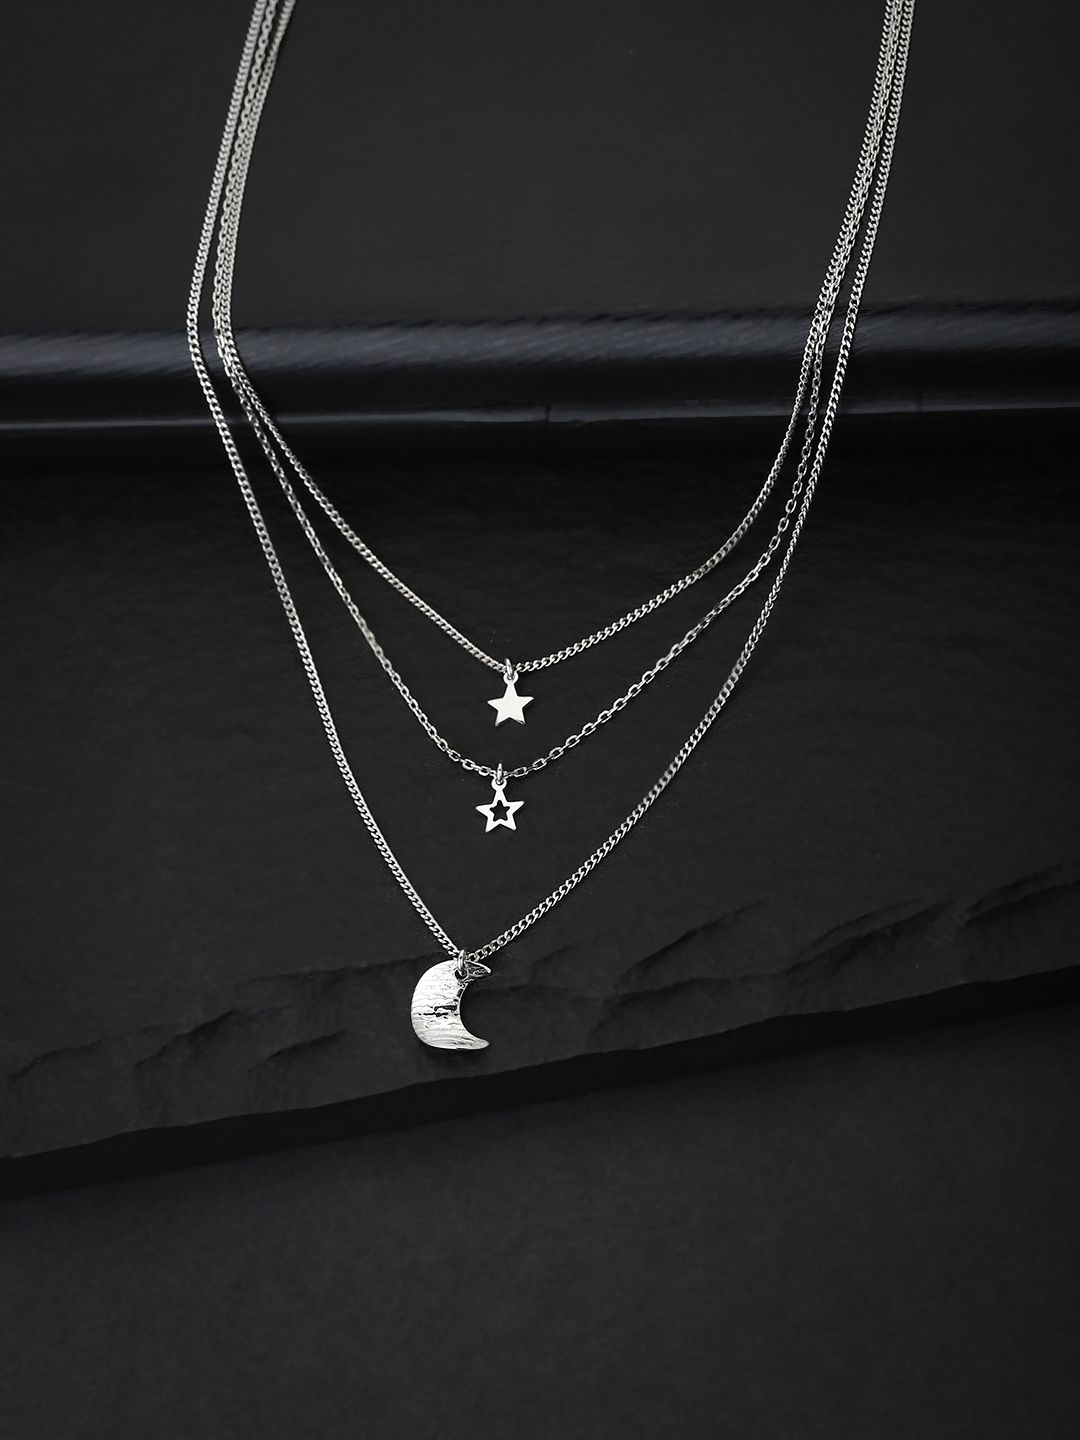 Carlton London Silver-Toned Rhodium-Plated Star & Moon Charms Layered Necklace Price in India